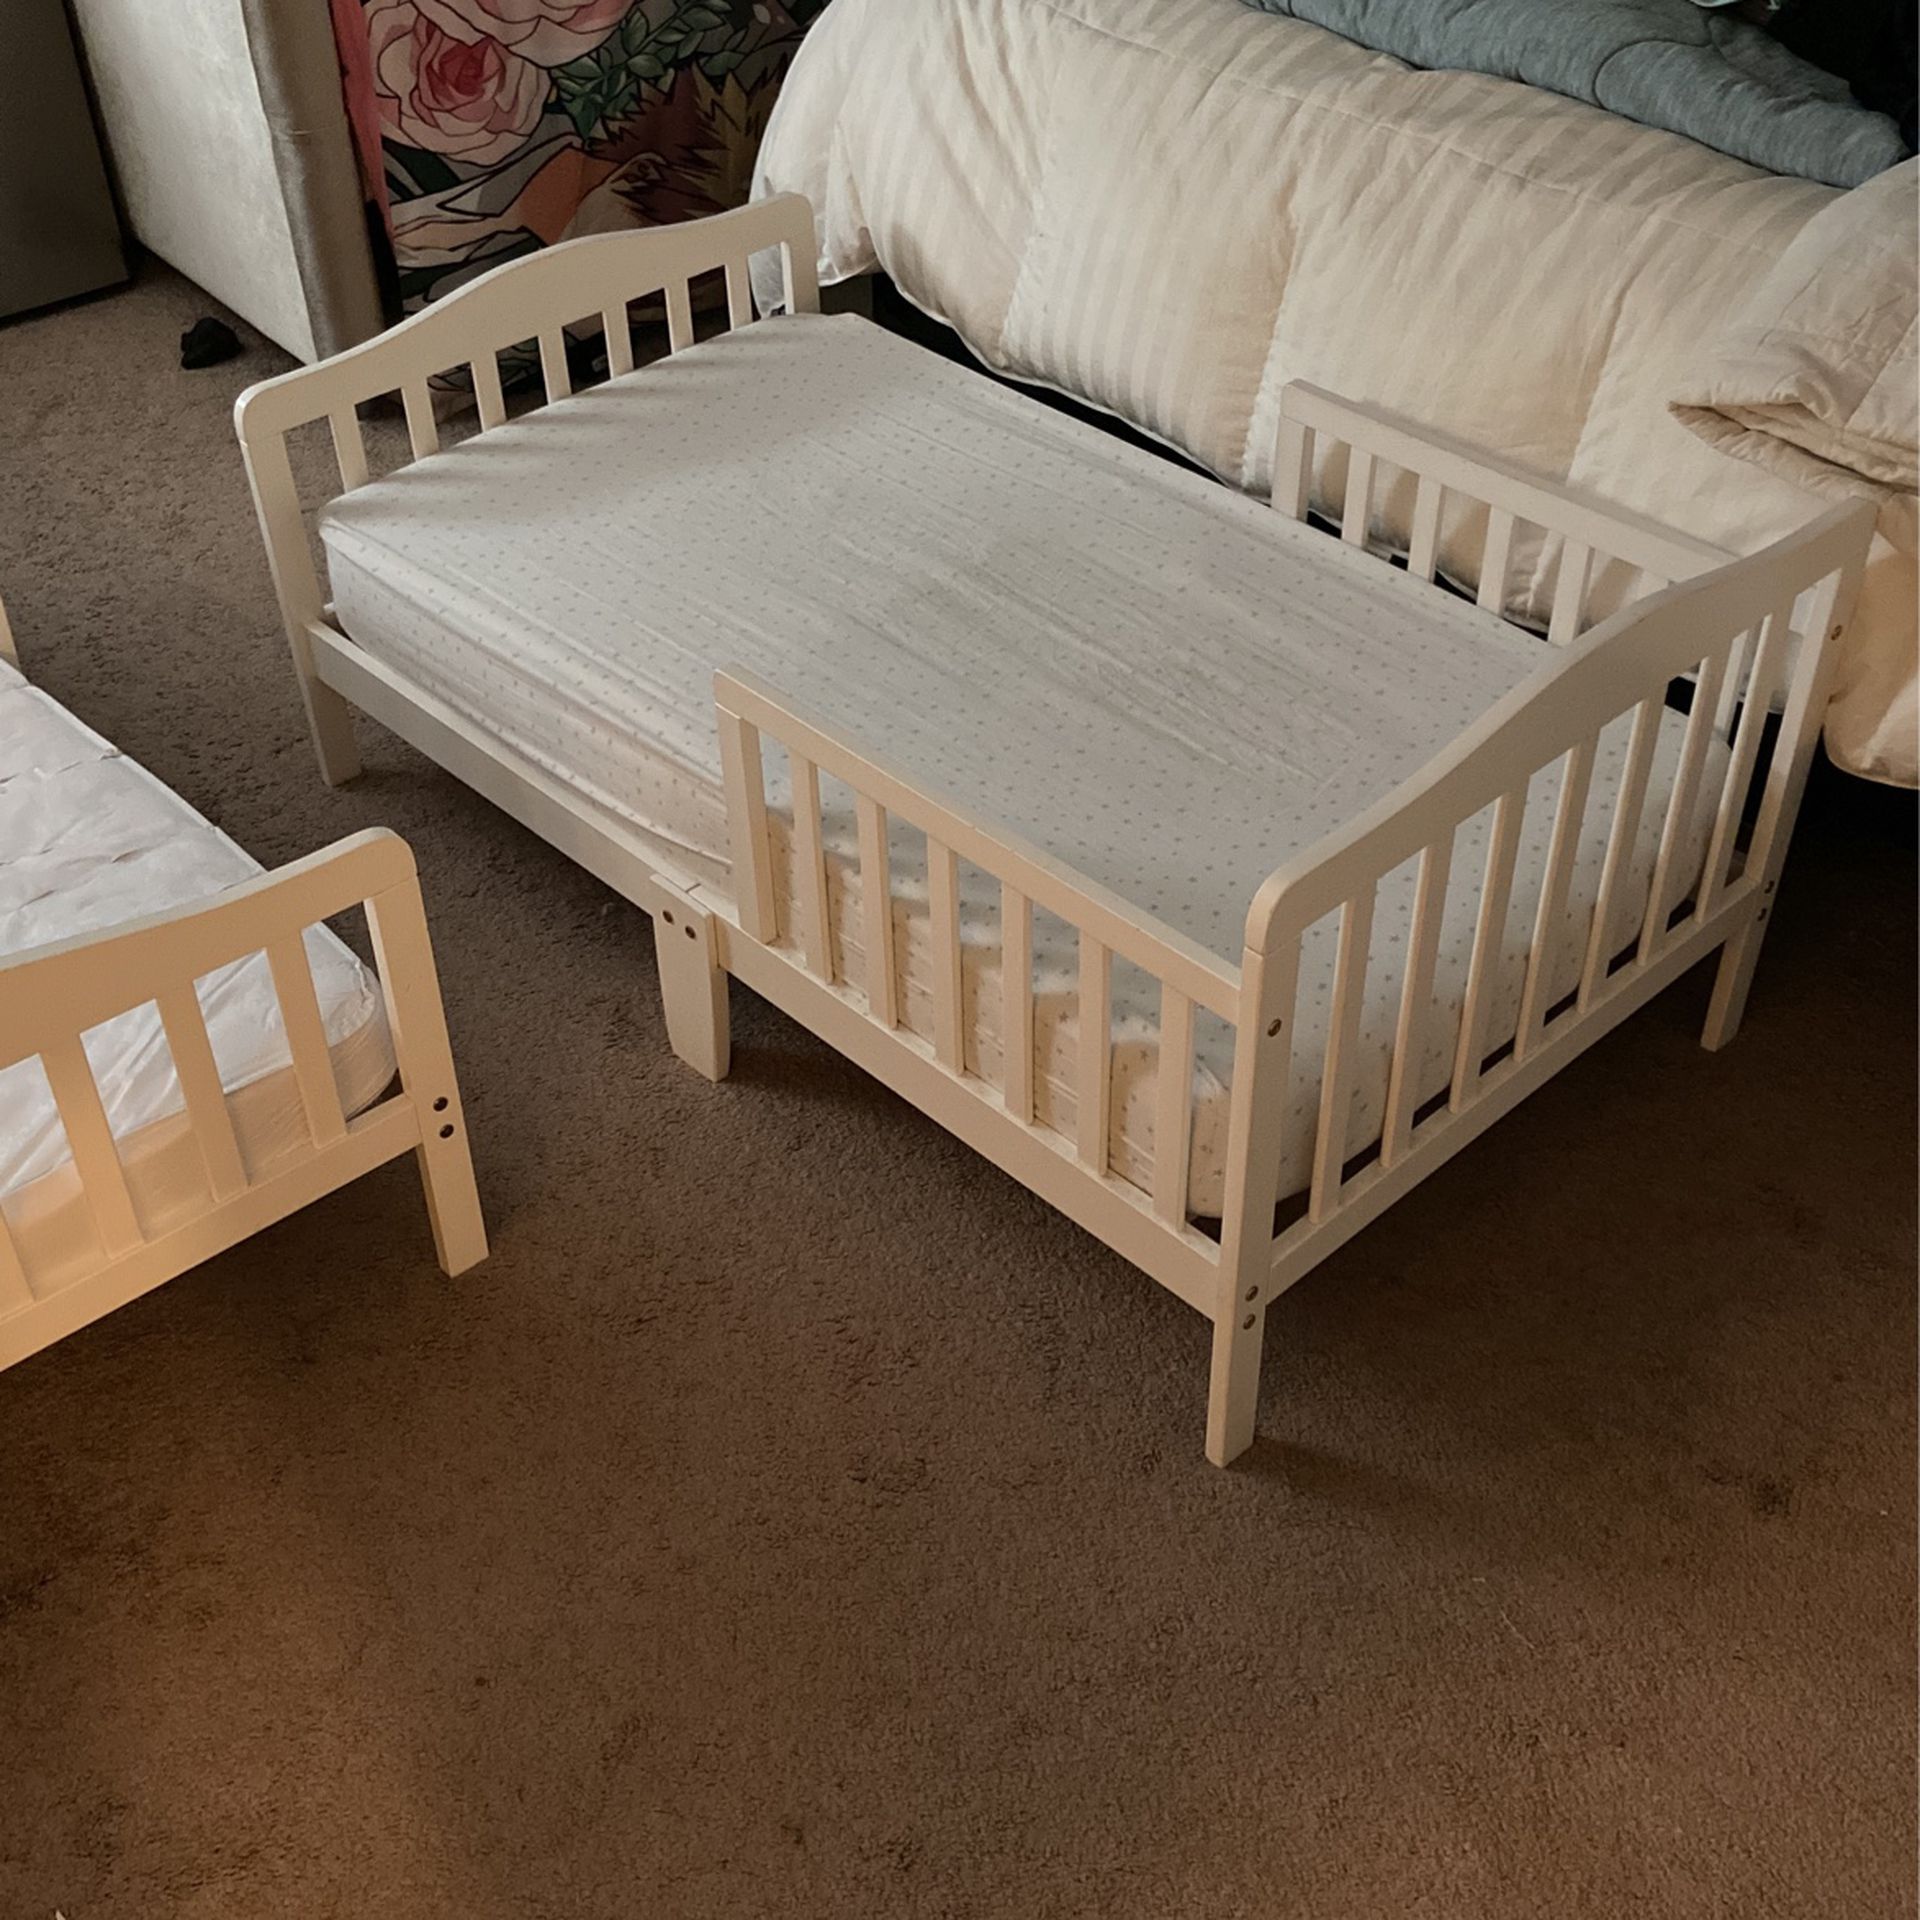 2 White Toddler Beds 